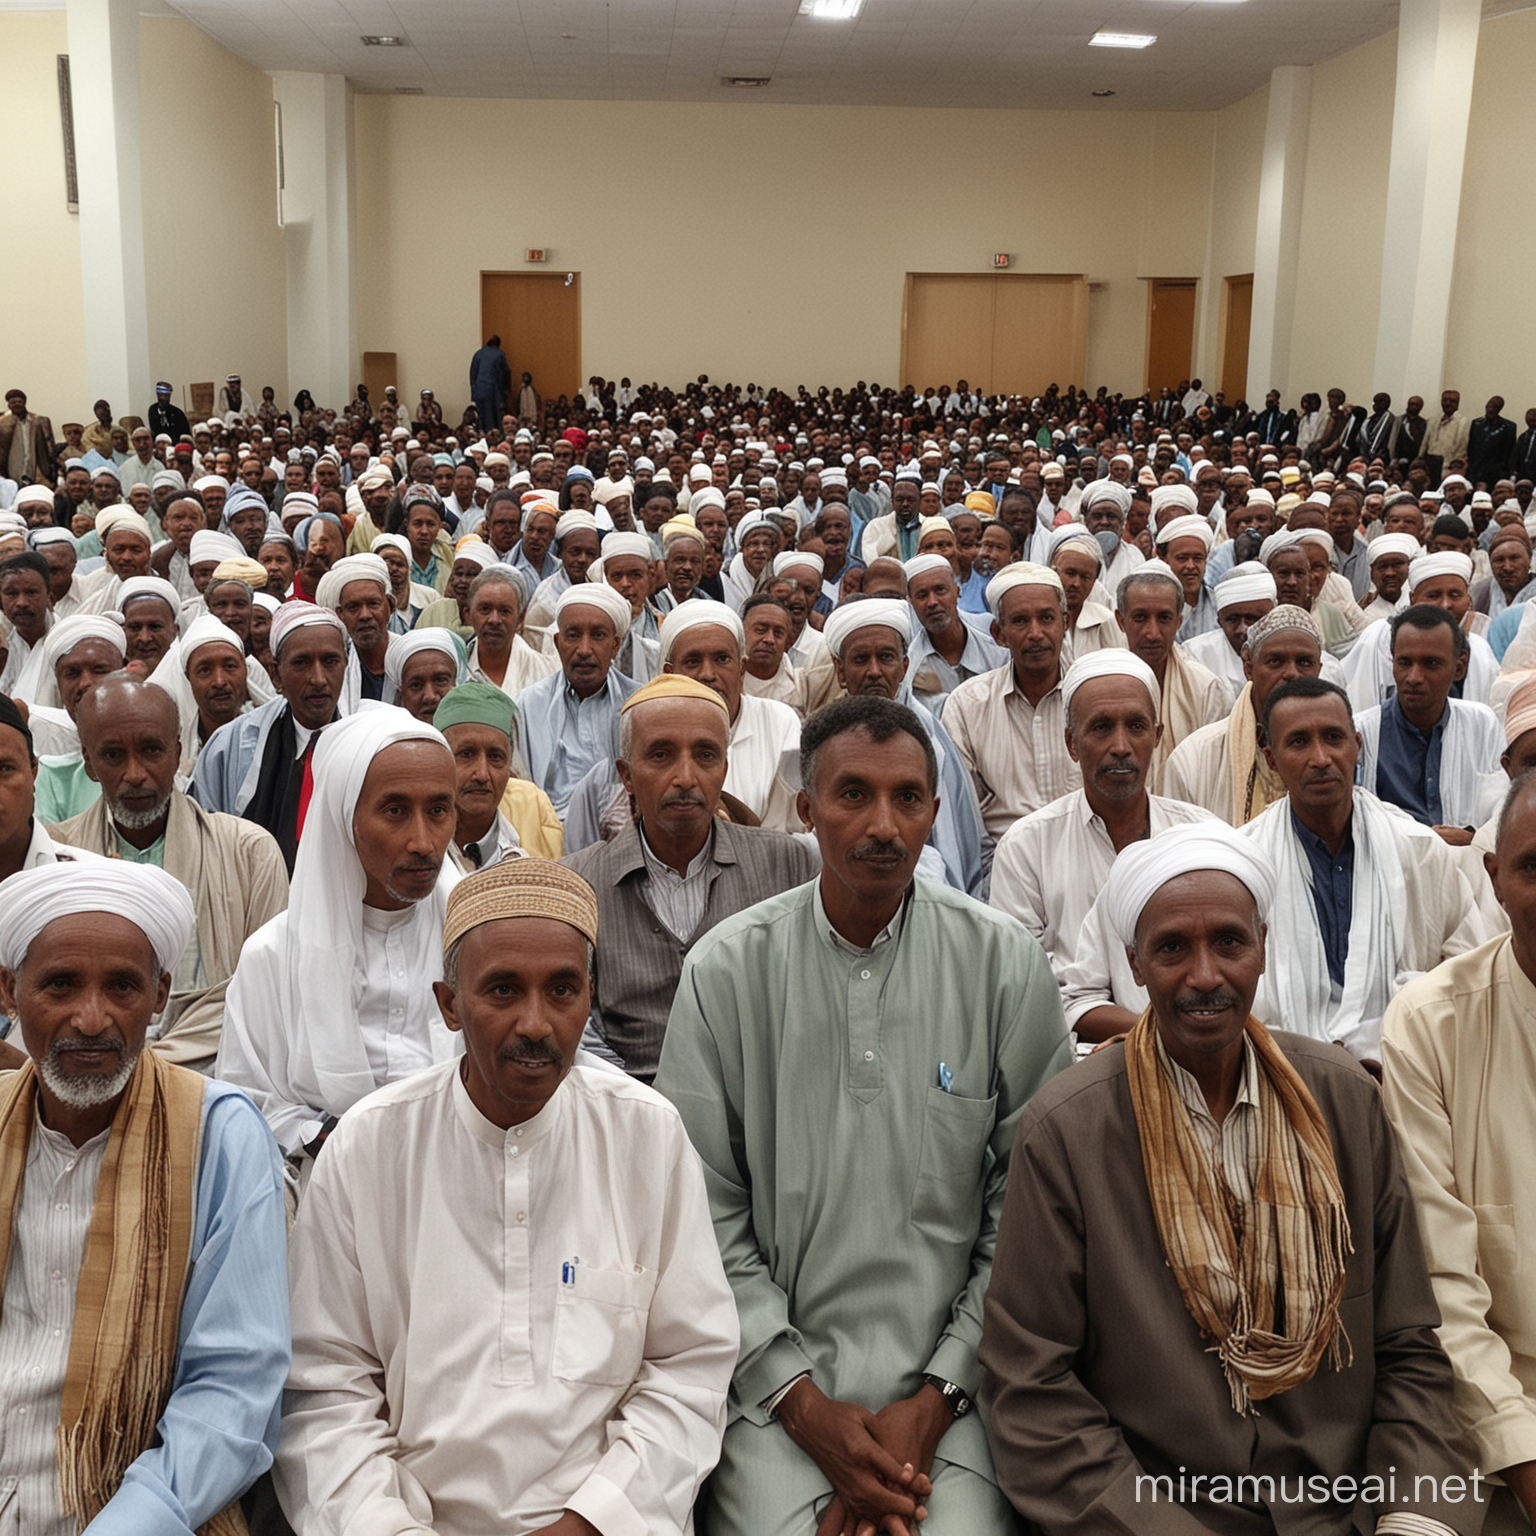 Somali Elders Conference Traditional Gathering of Wisdom and Leadership